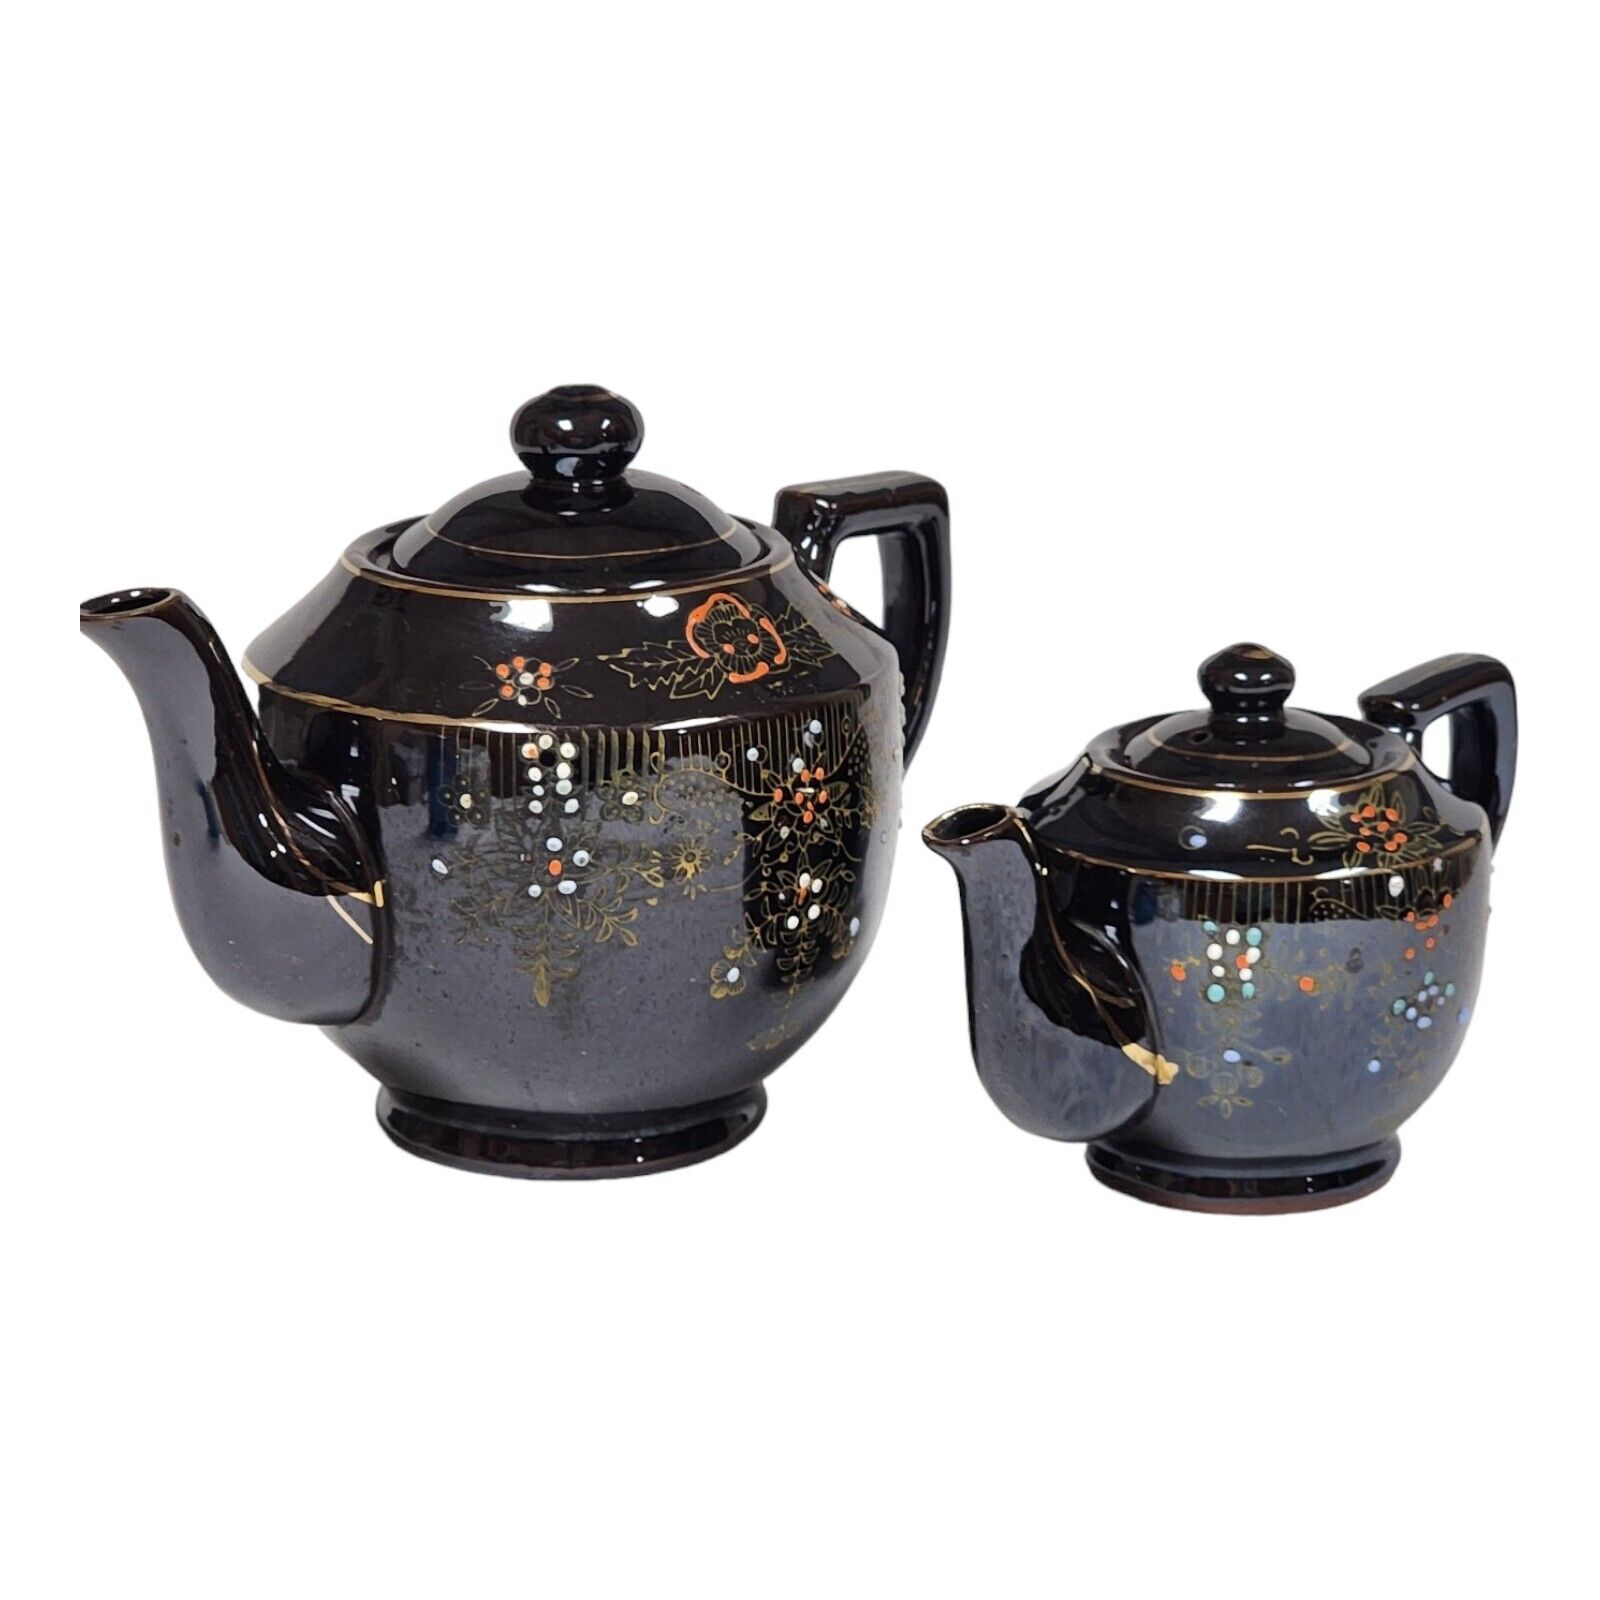 1940s Redware Pottery Teapot Set Japanese Moriage Hand-Painted Brown